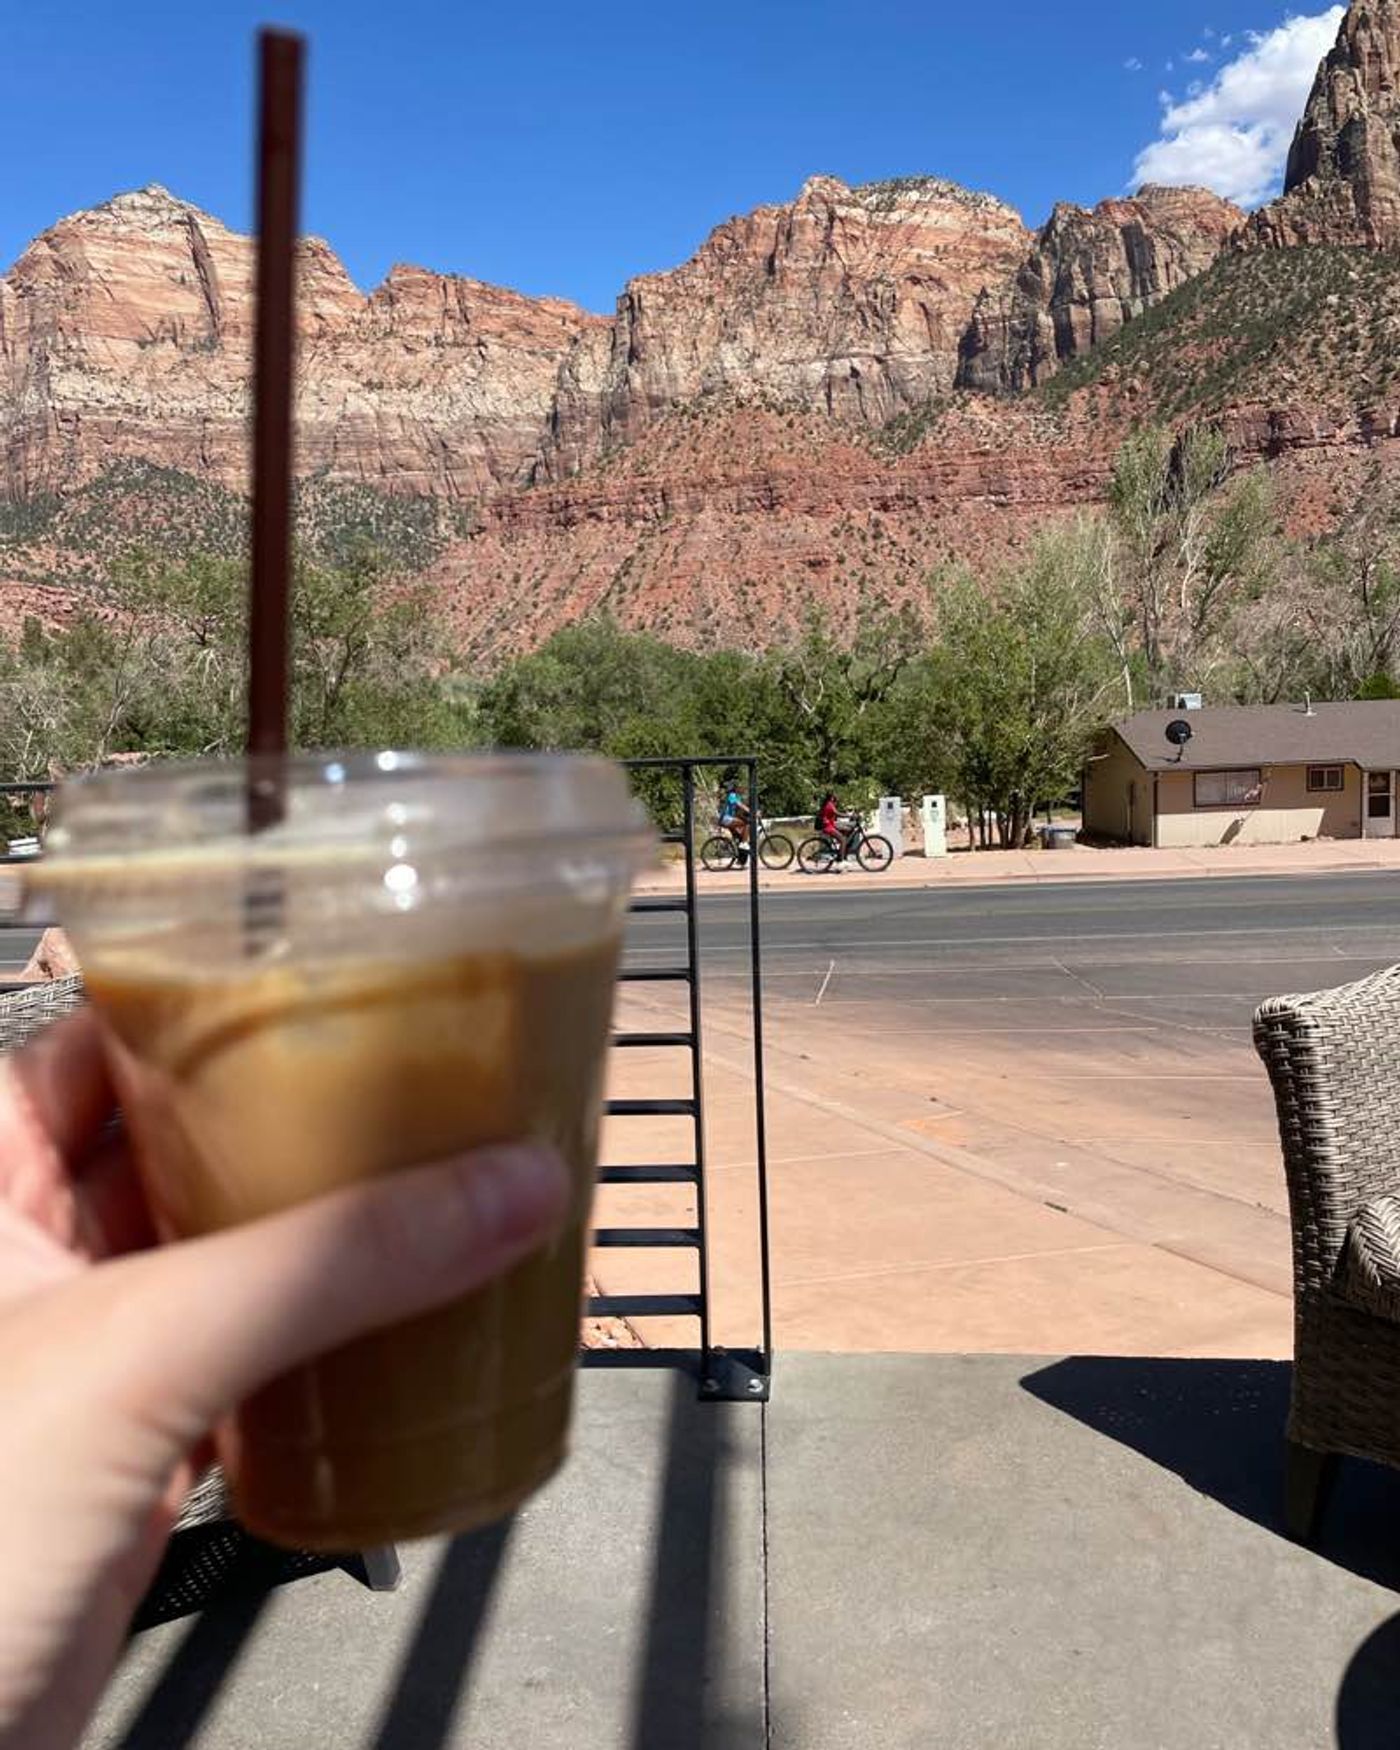 Iced Latte with a view 🥰